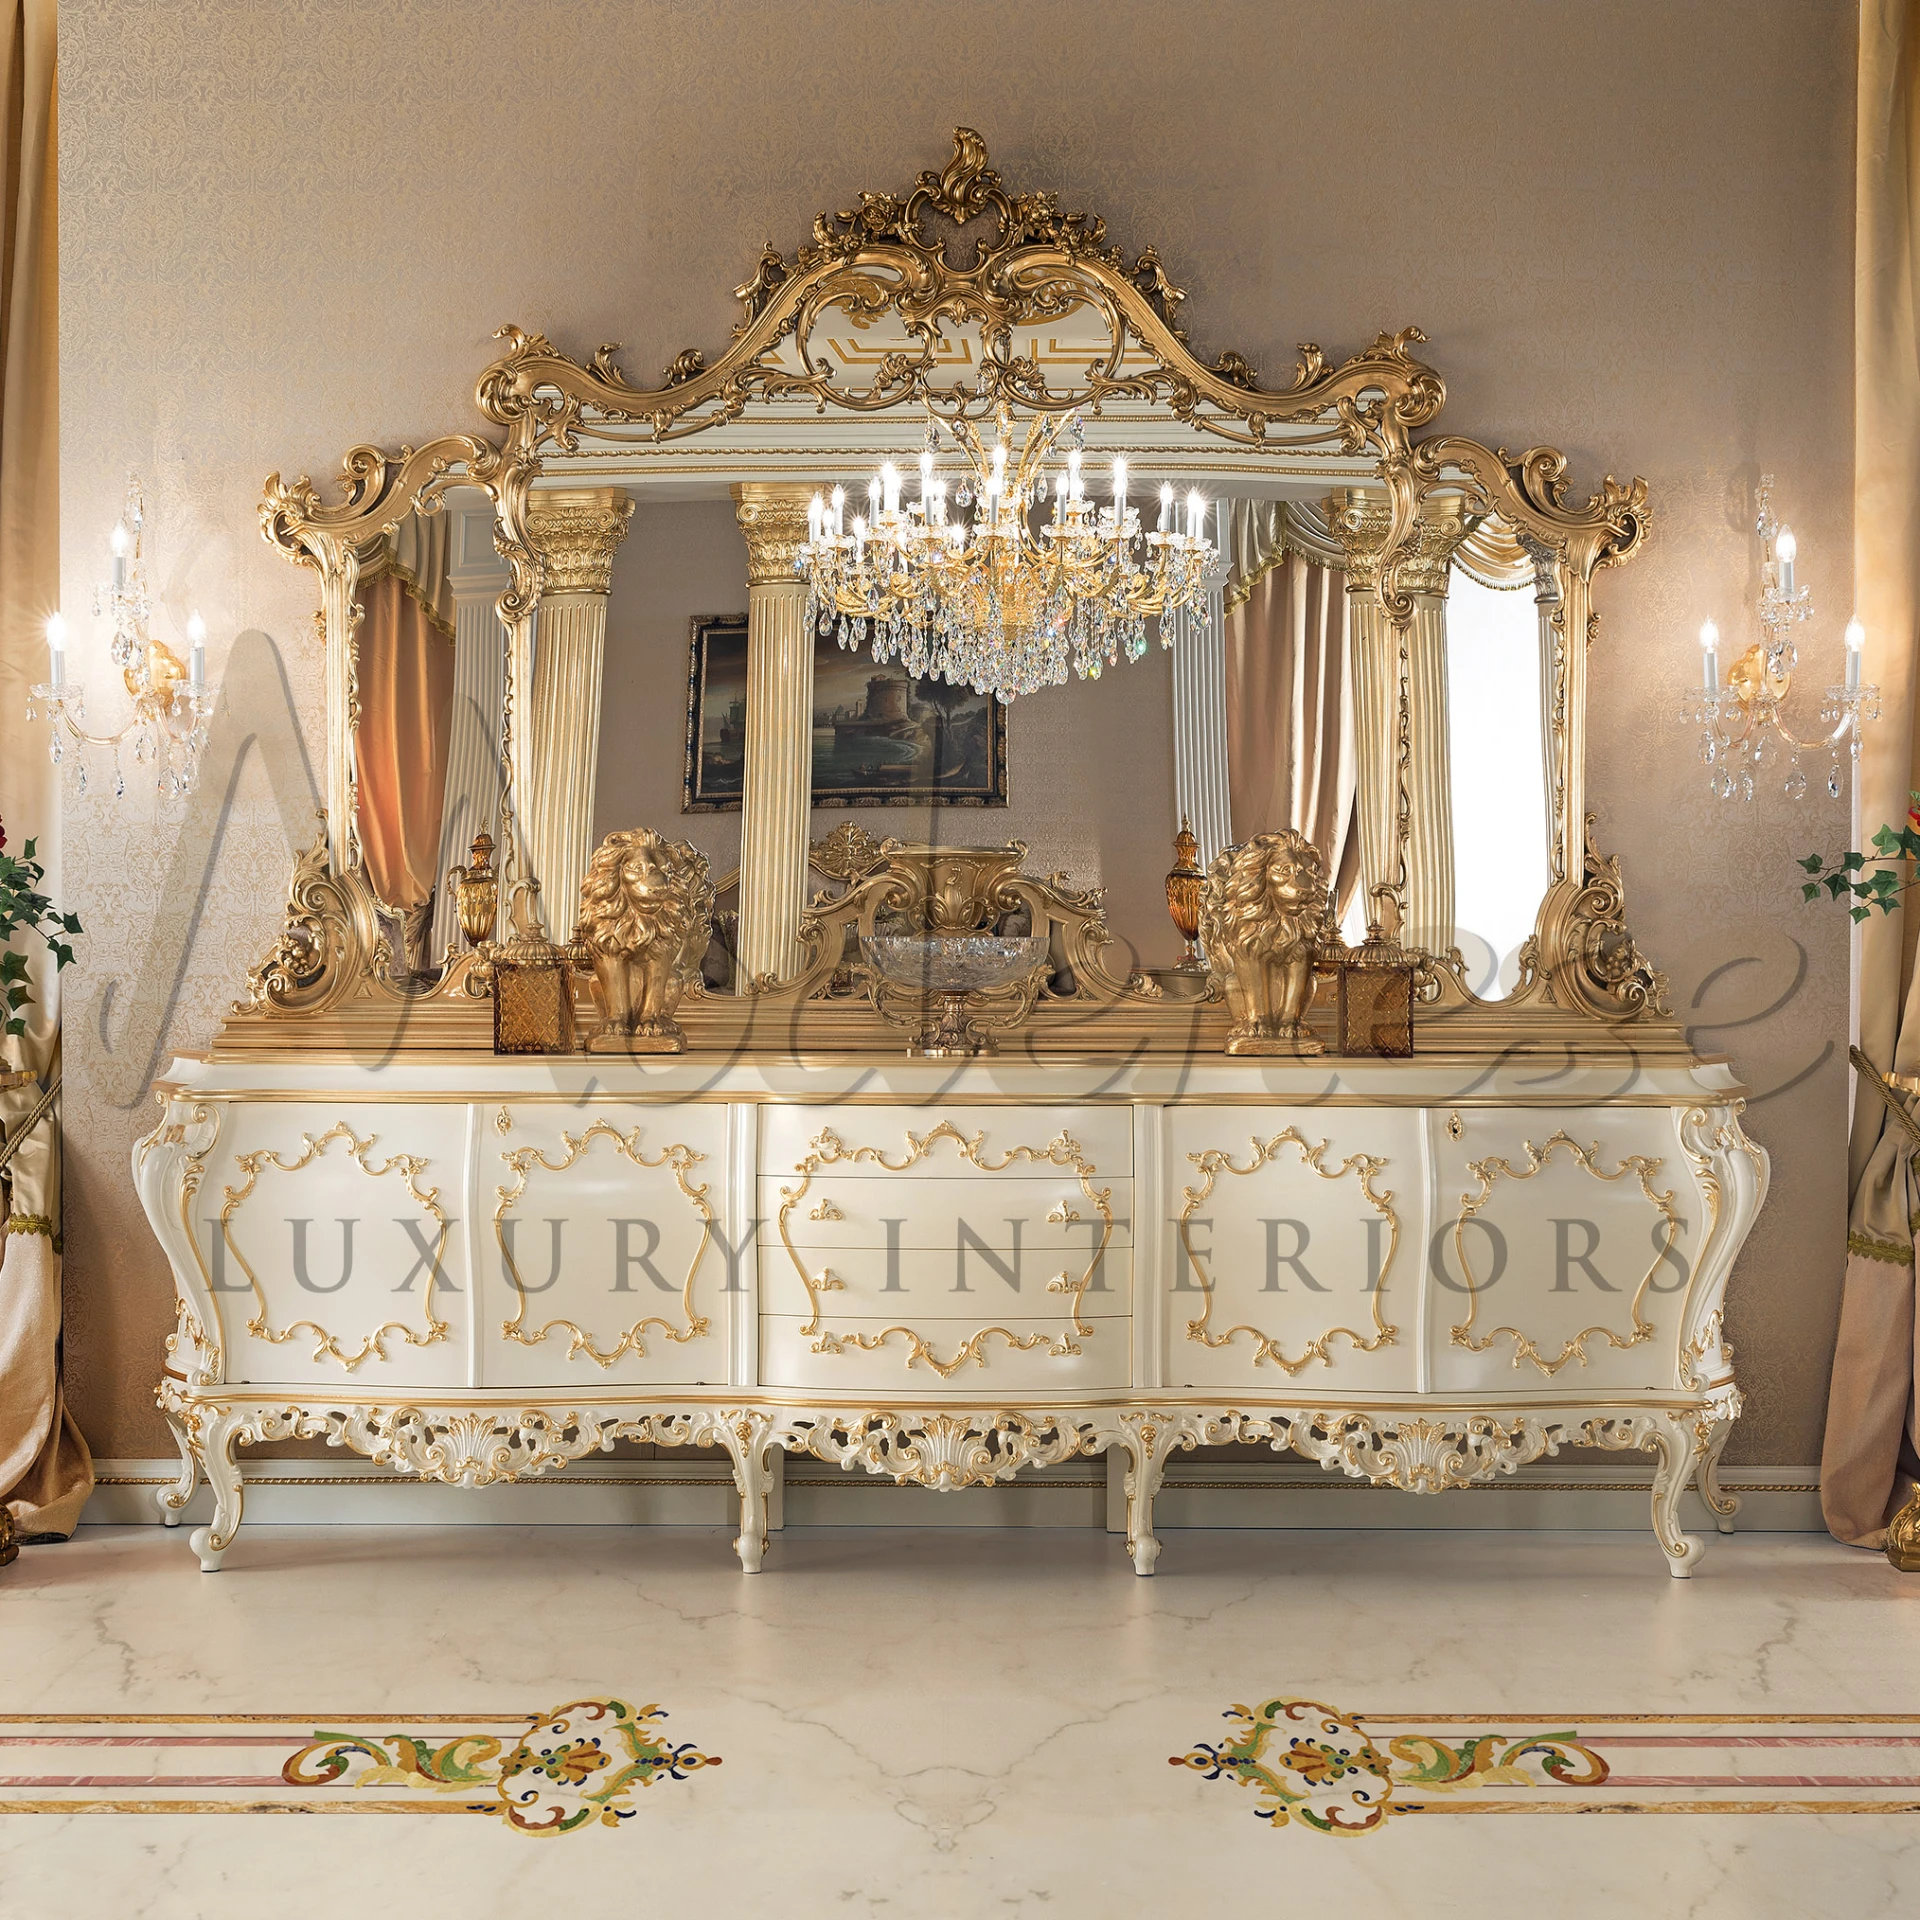 Luxurious 24k Gold Leaf Mirror to complement baroque credenza accessories
